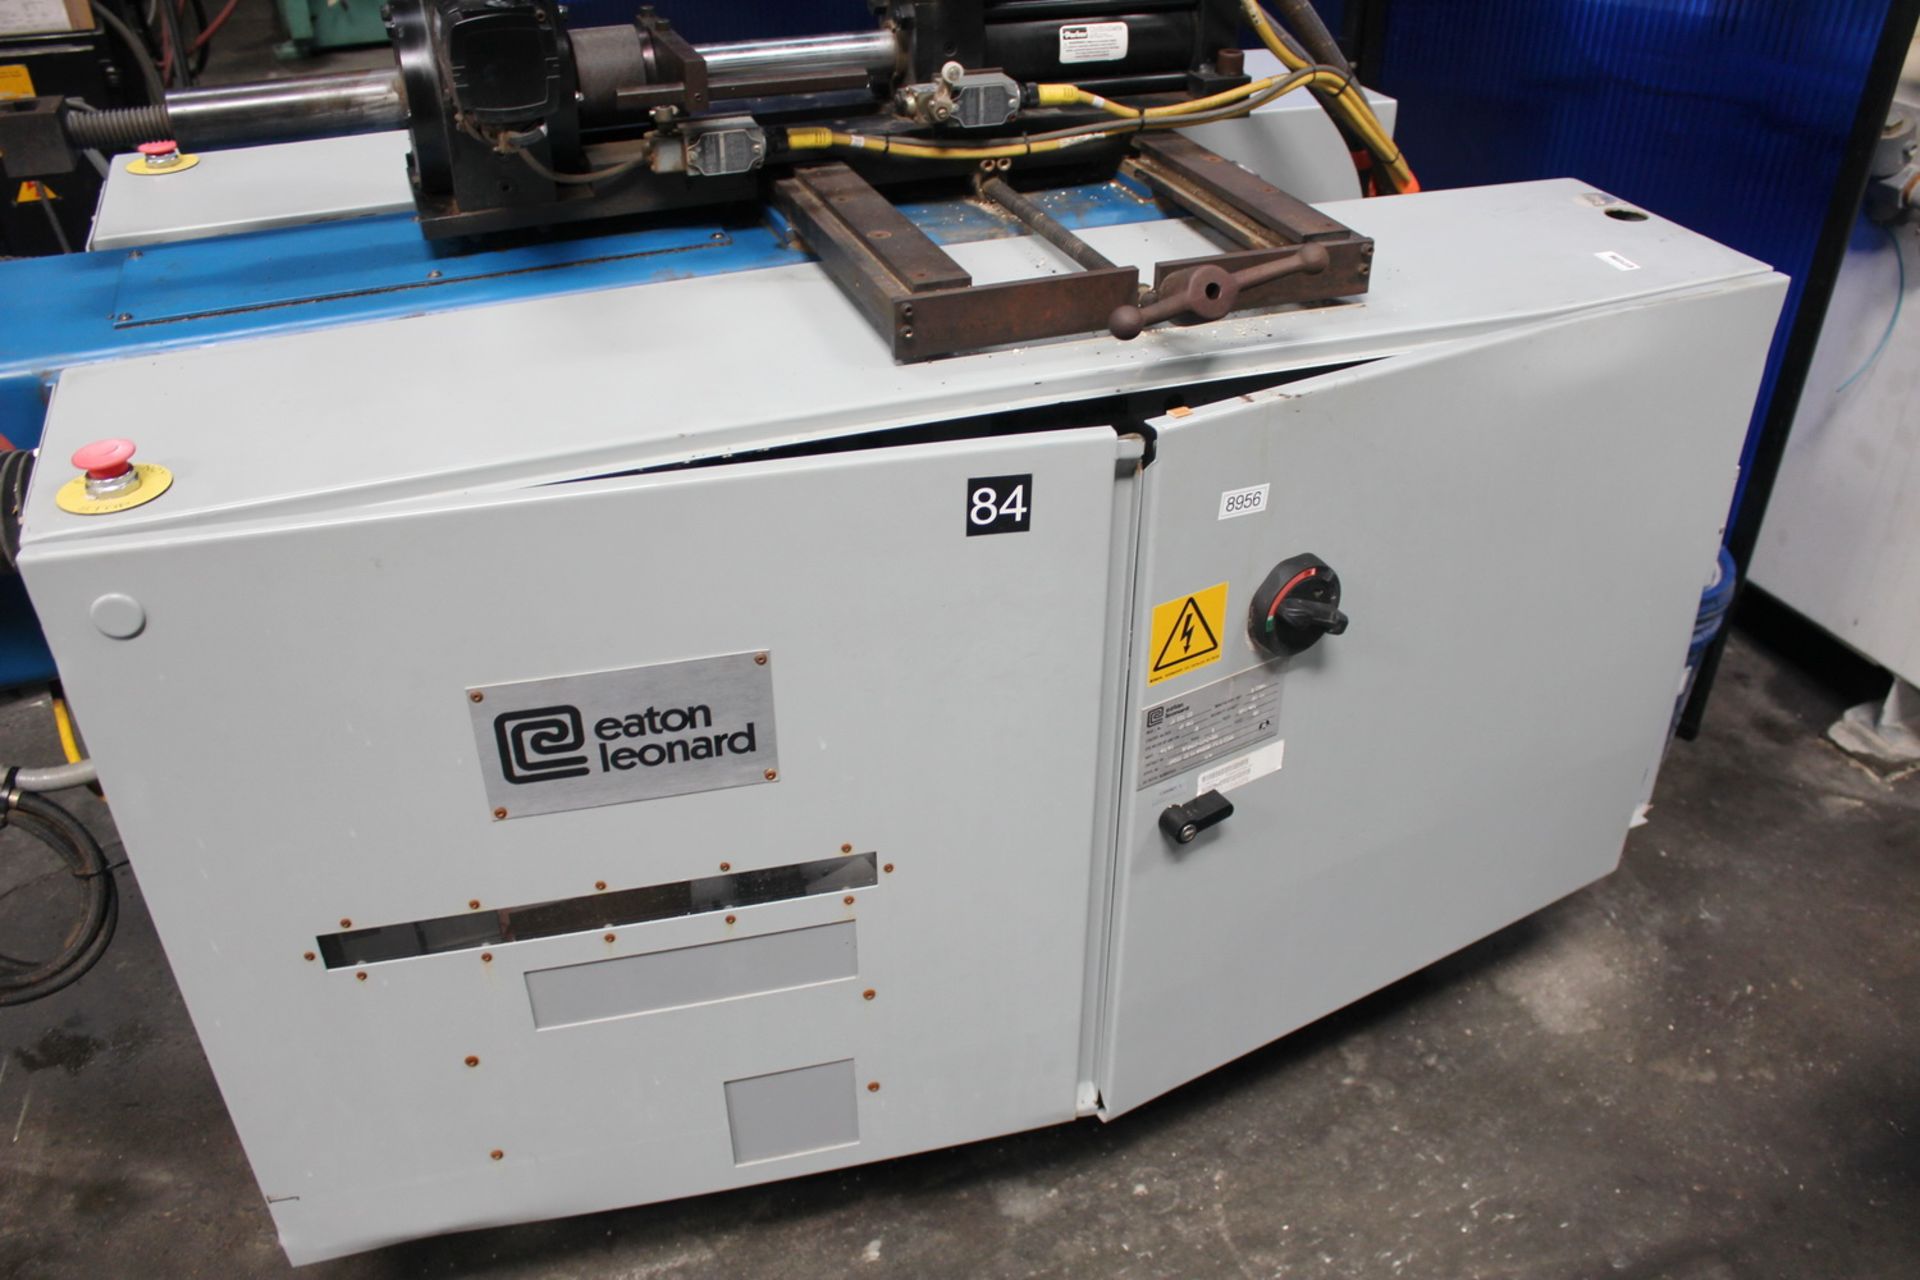 Eaton Leonard 2 Axis CNC Hydraulic Tube & Pipe Bender 2'' x 200''. LOADING FEE FOR THIS LOT: $750 - Image 16 of 21